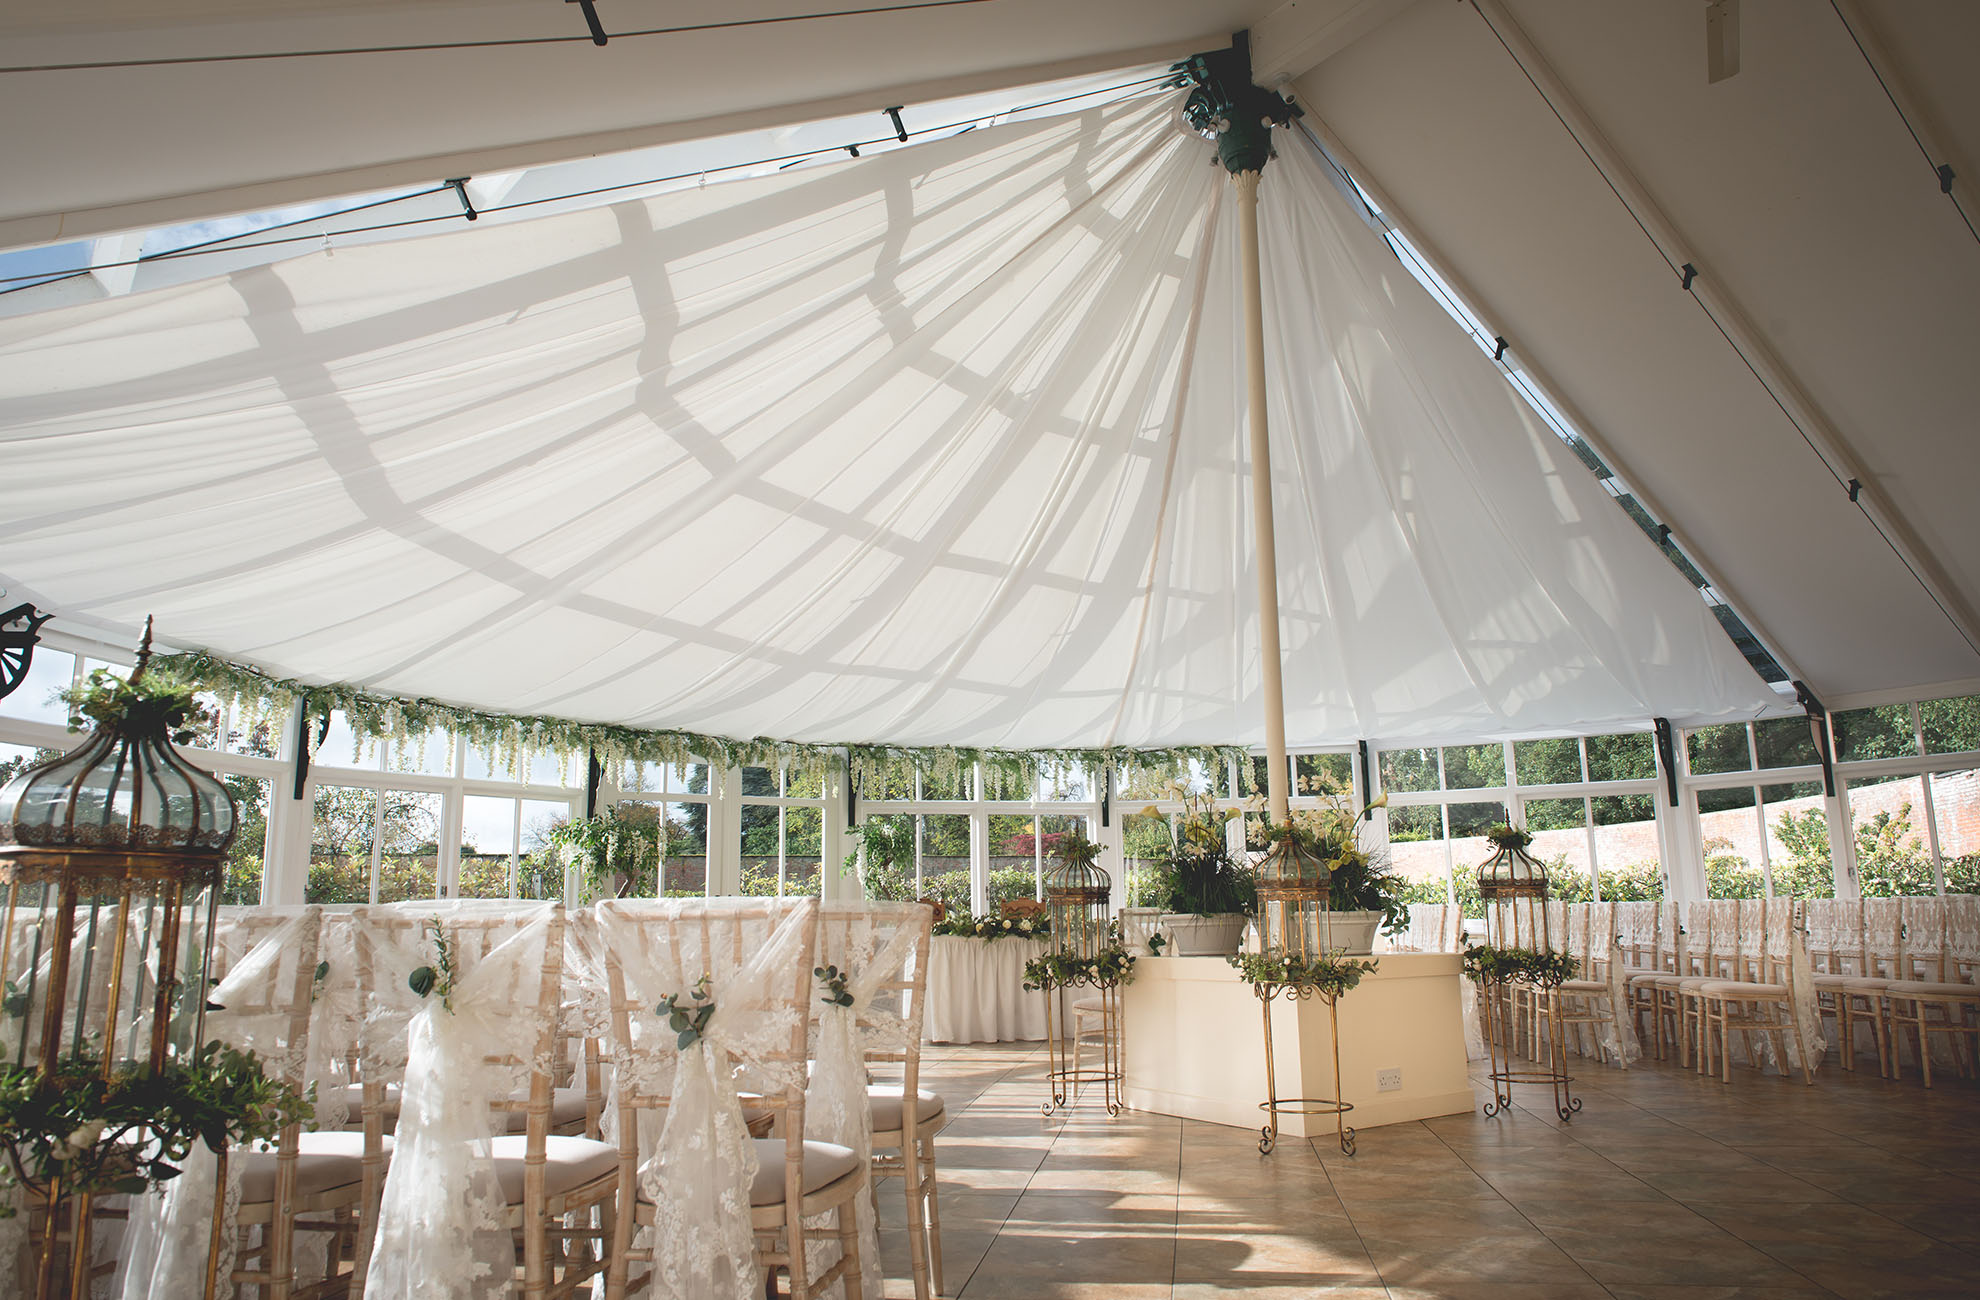 The Glasshouse at Combermere Abbey is the perfect setting for your wedding ceremony